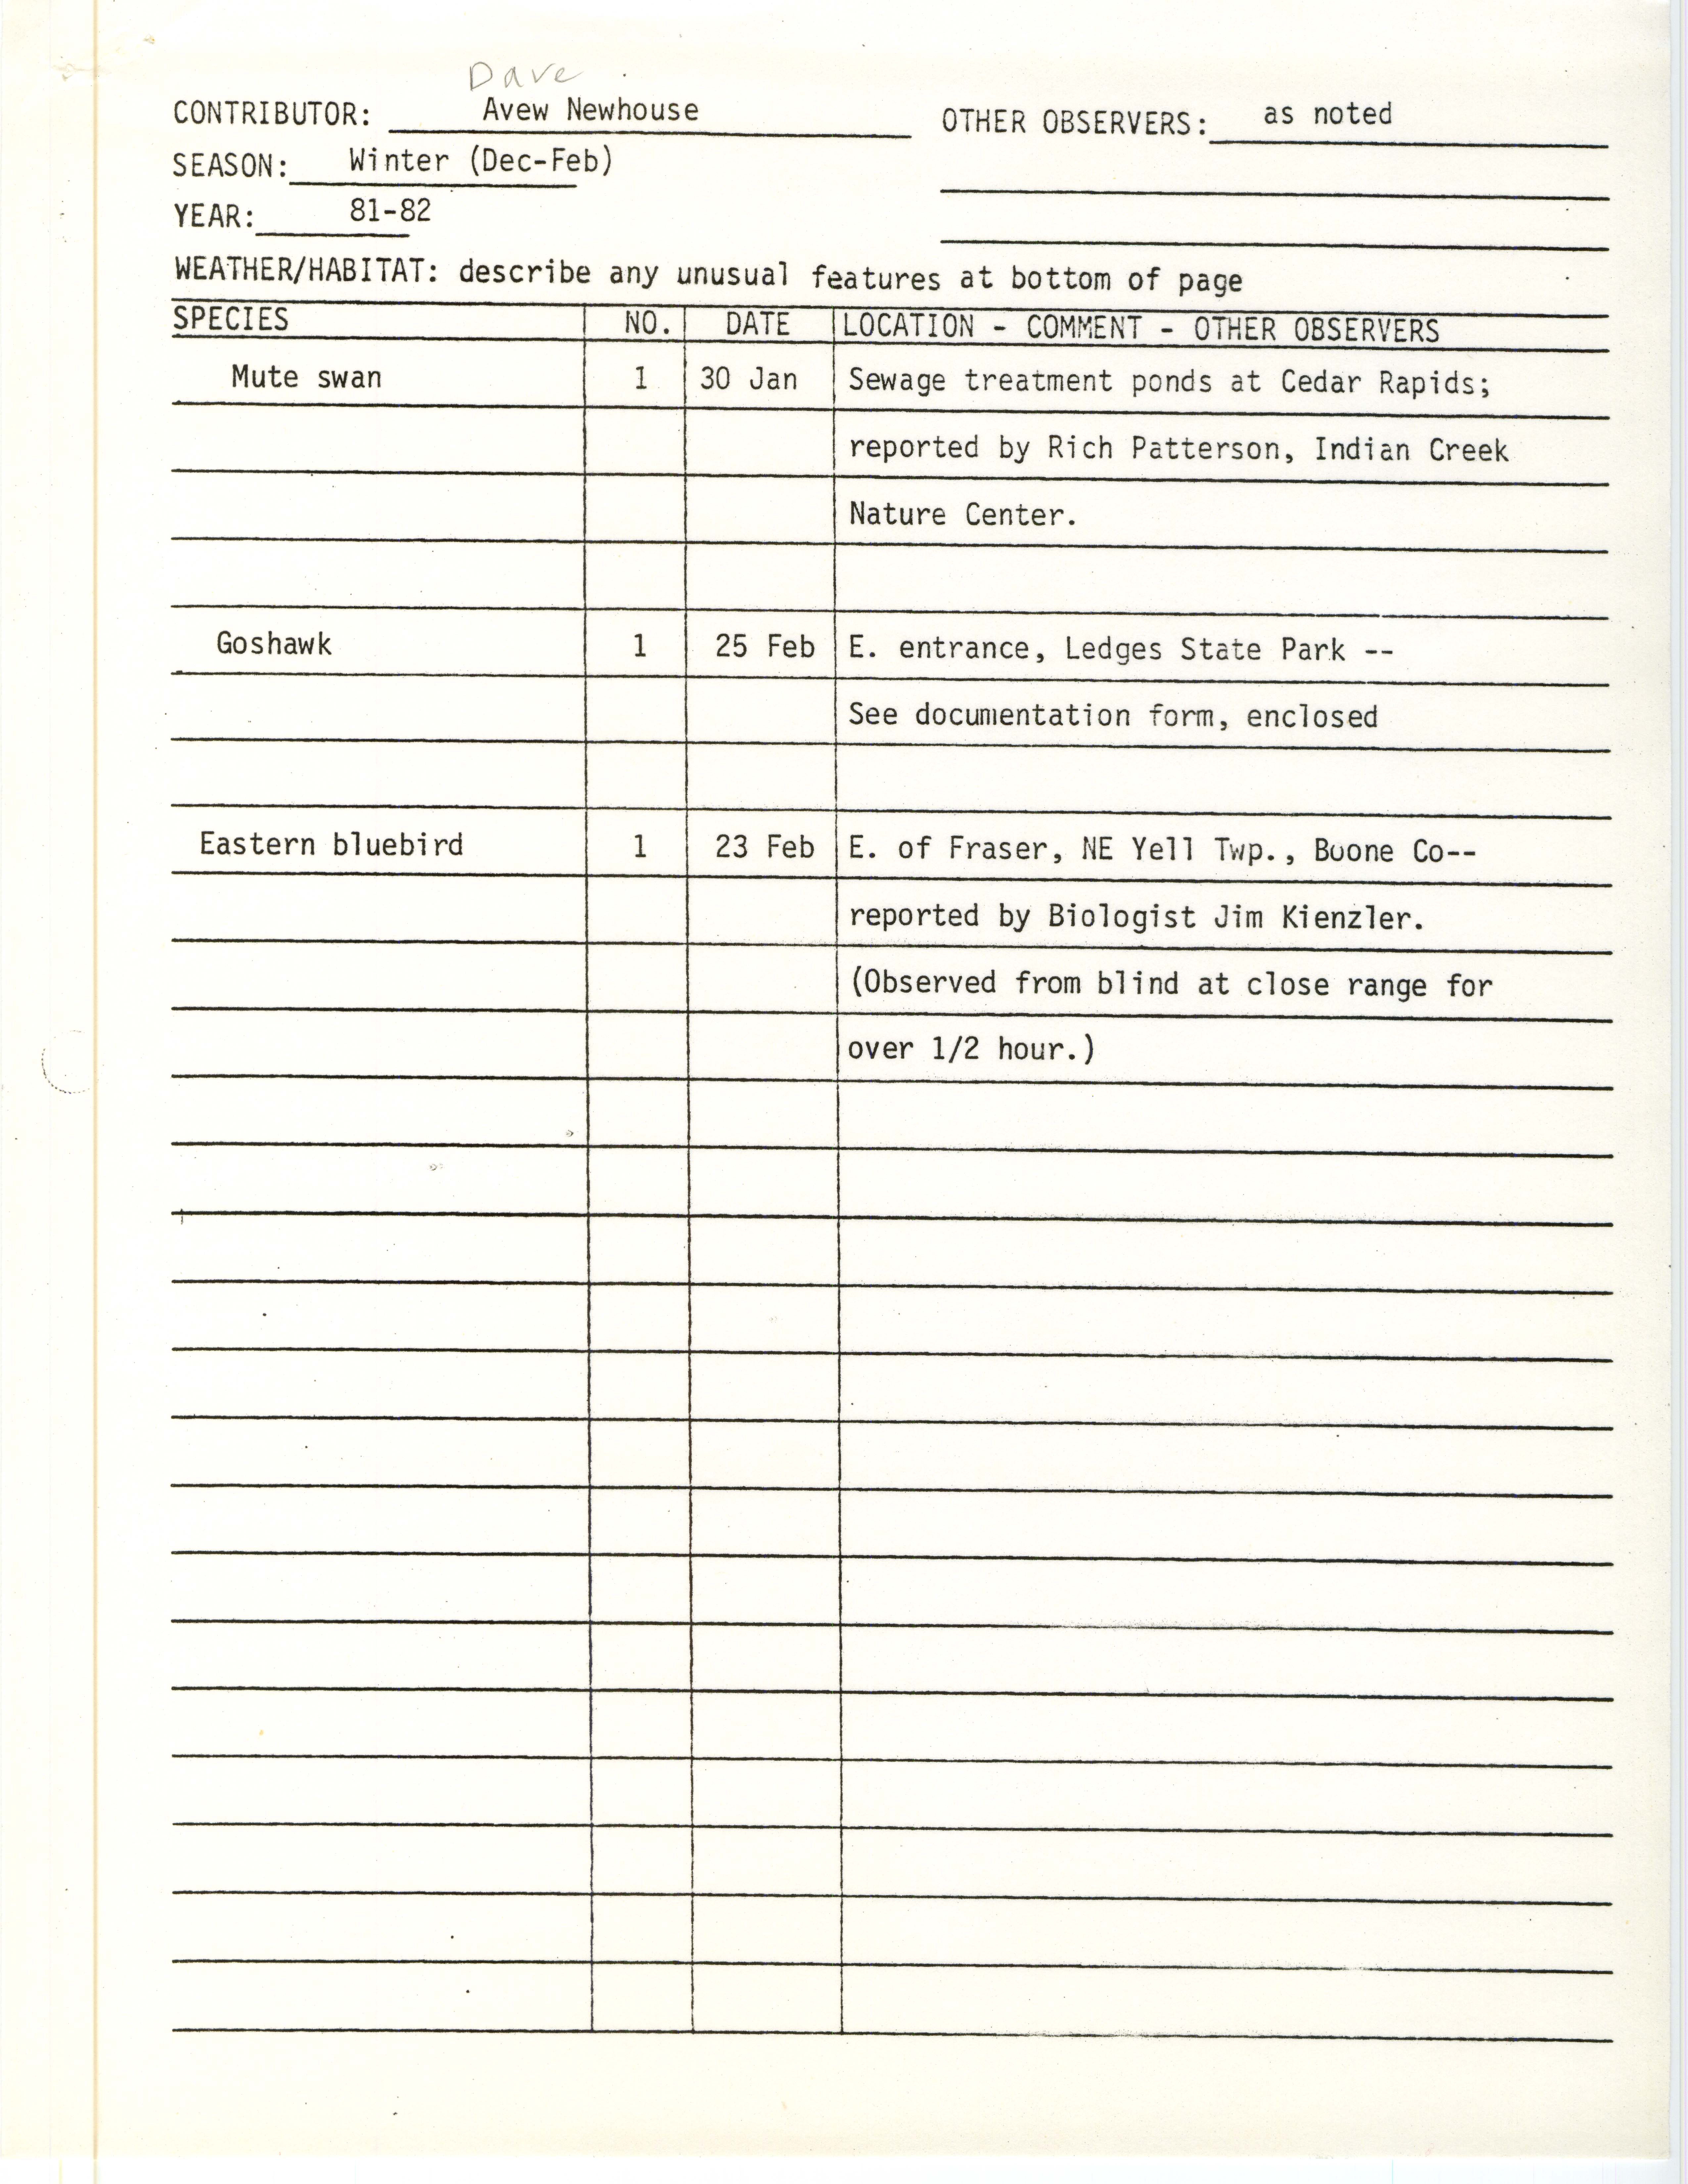 Field notes contributed by David A. Newhouse, winter 1981-1982